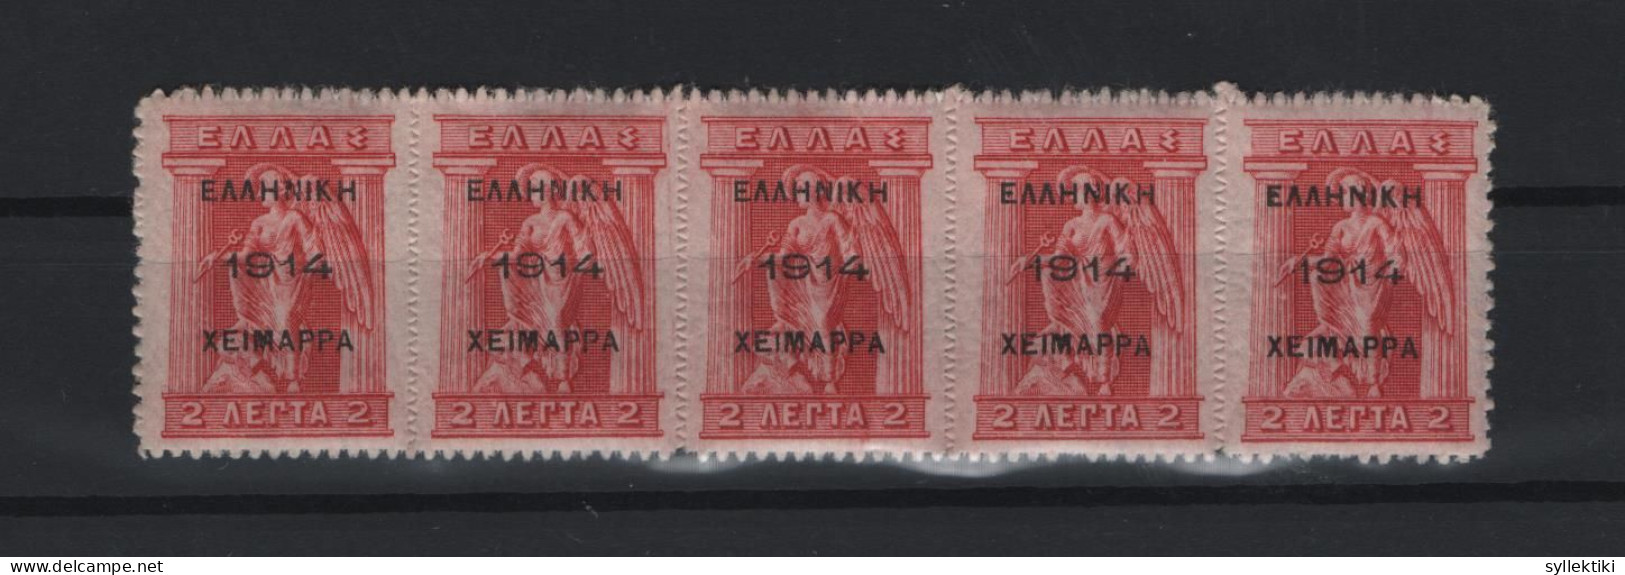 GREECE 1914 CHIMARRA 2 LEPTA MNH STAMPS IN STRIP OF 5   HELLAS No 69  AND VALUE EURO 900.00 - Epirus & Albanie